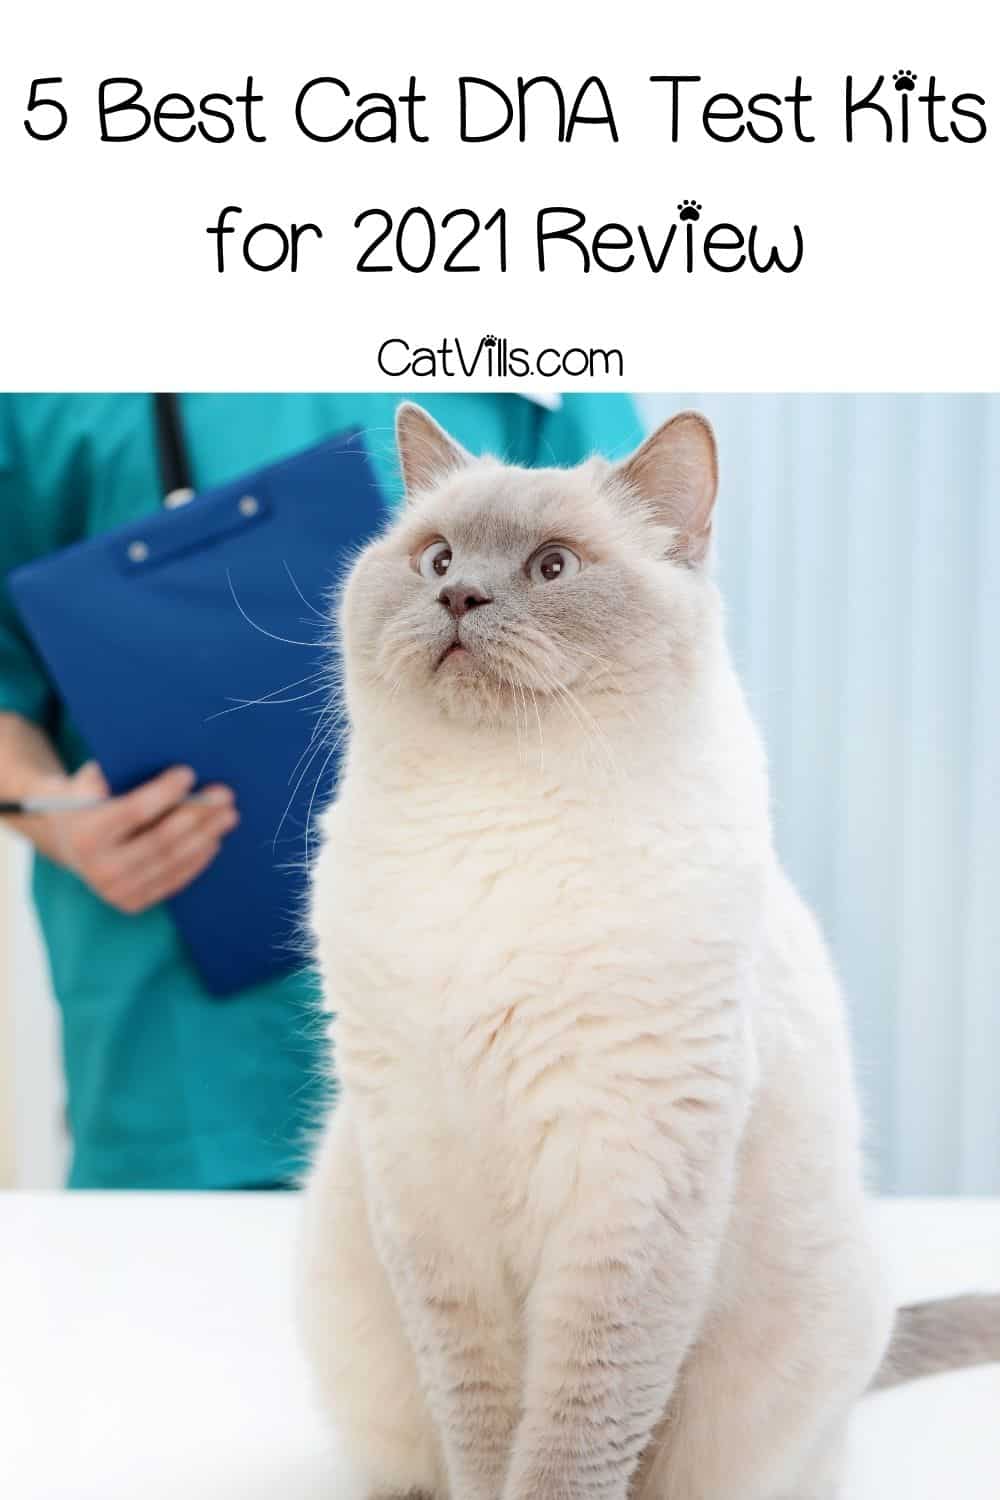 Top 5 Cat DNA Test Reviews in 2021 (Definitive Guide)